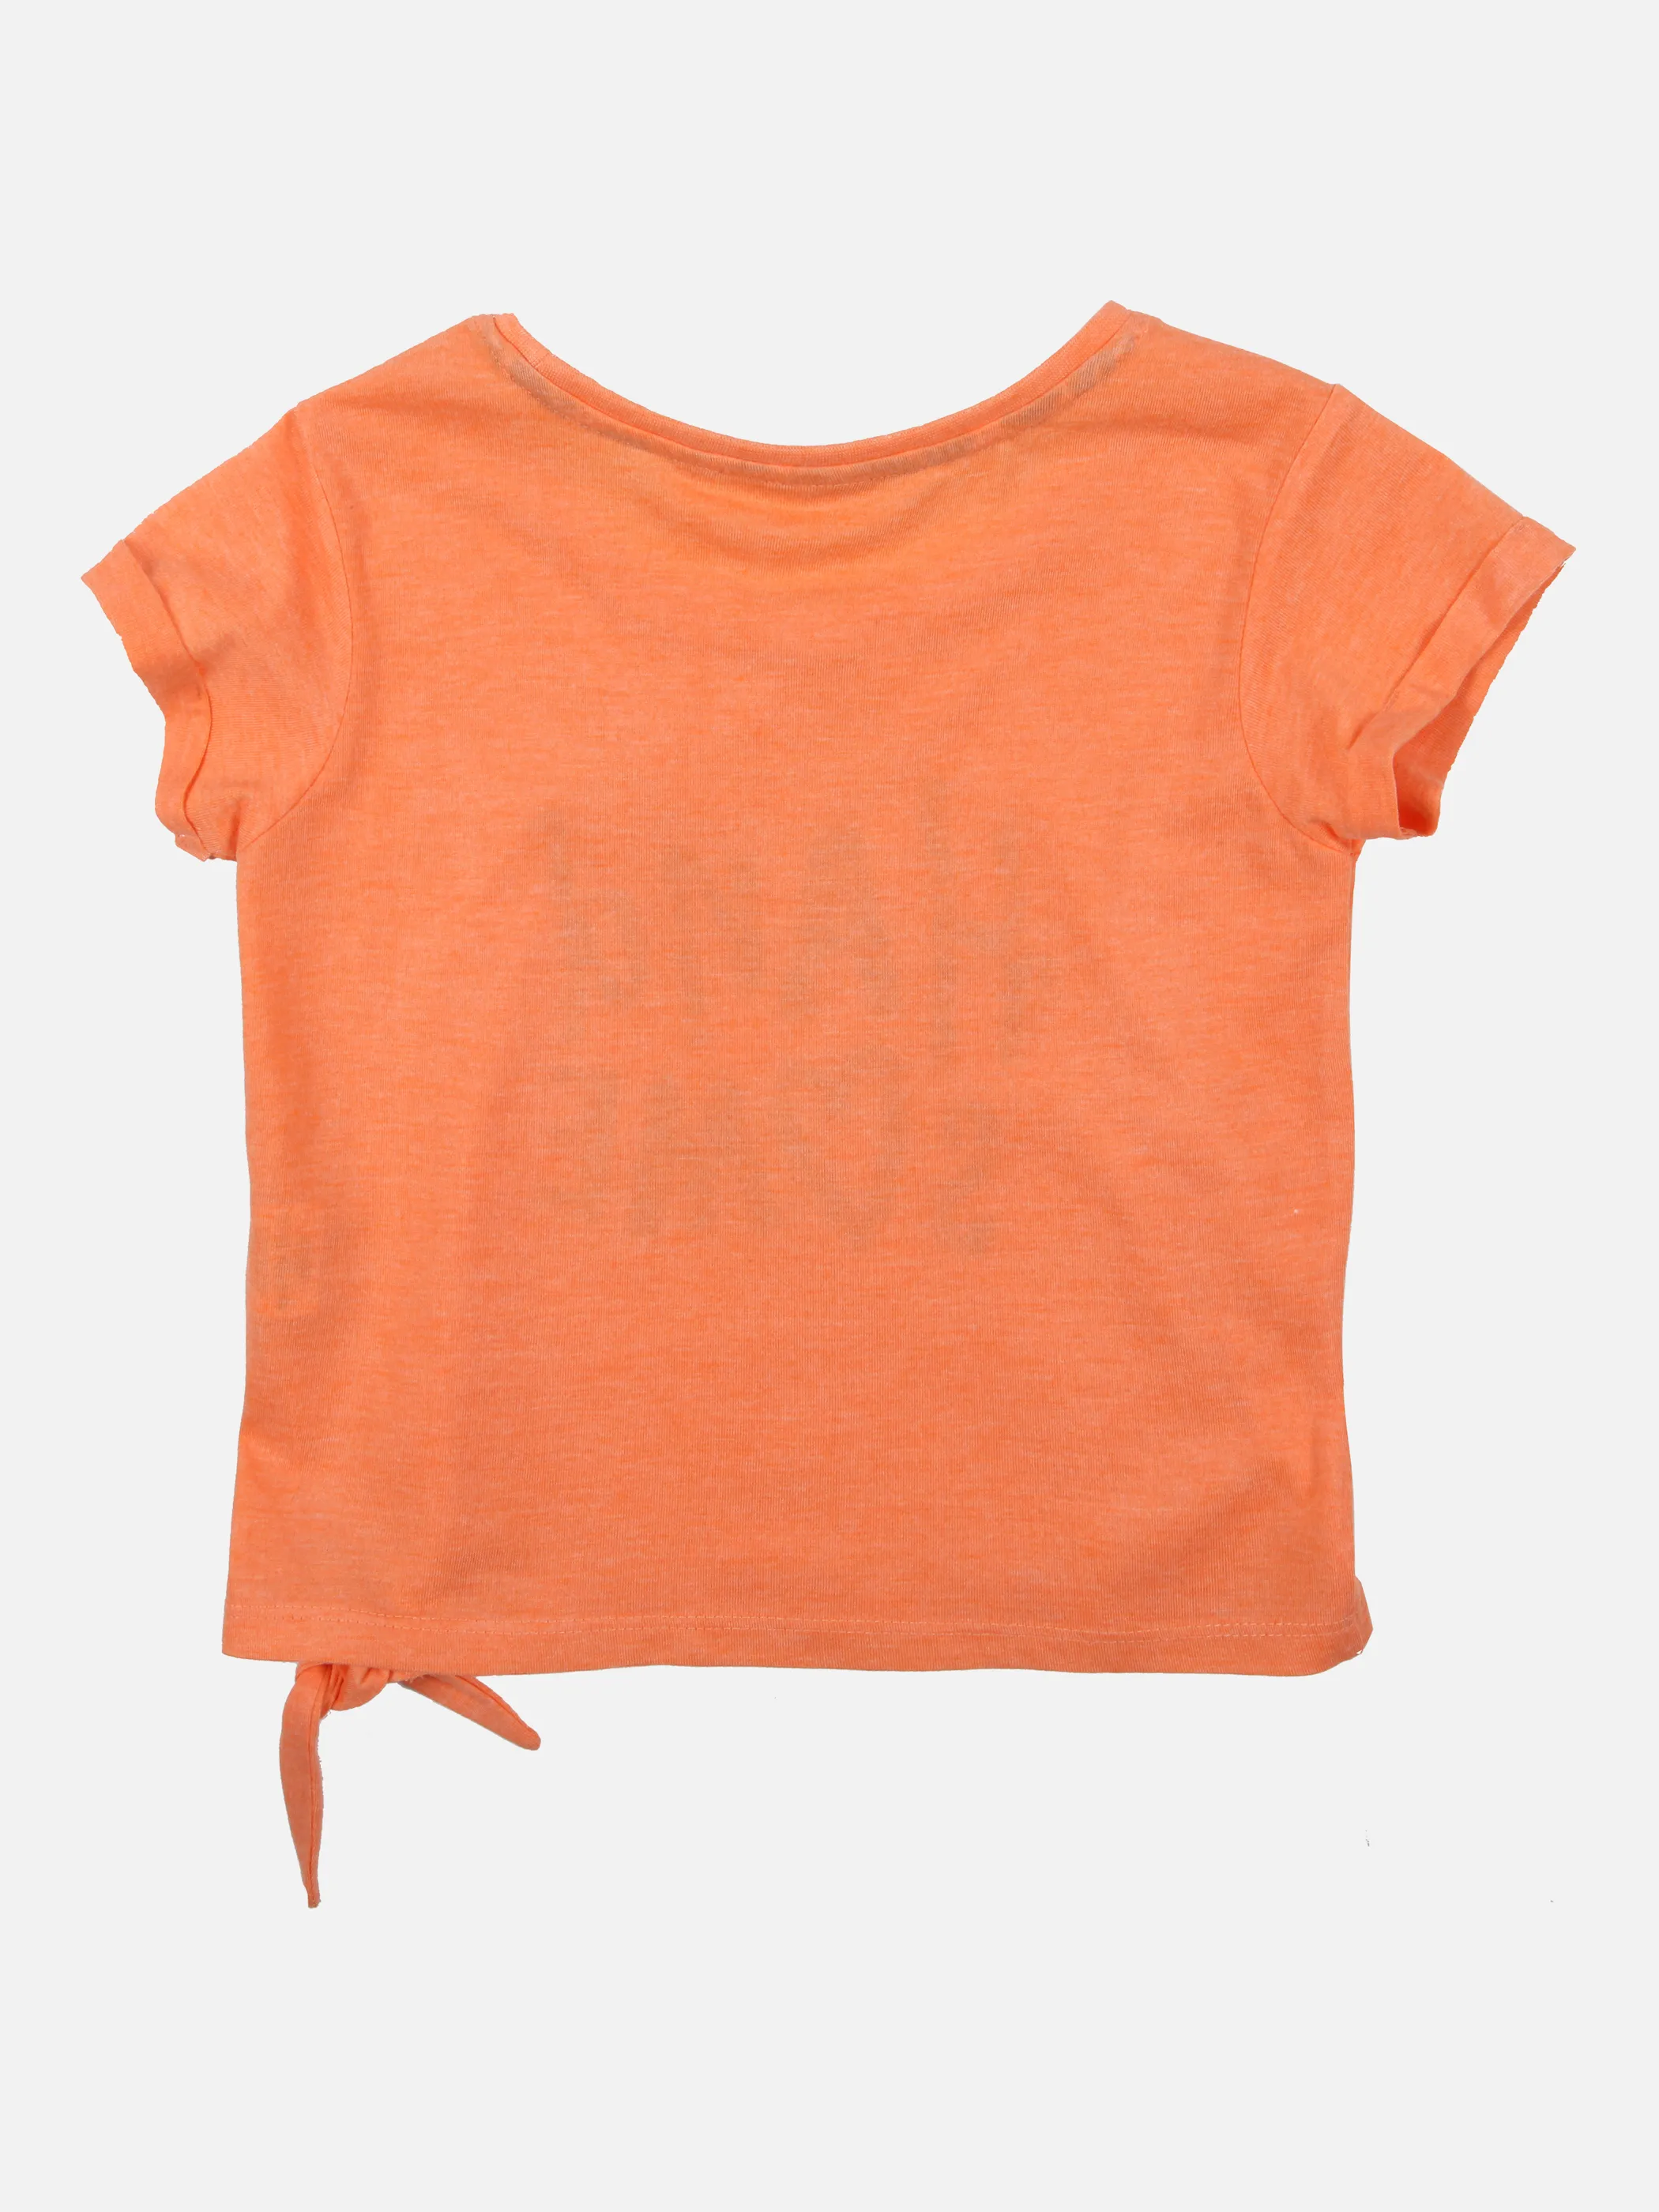 Stop + Go MG TShirt in apricot mit Orange 851902 APRICOT 2